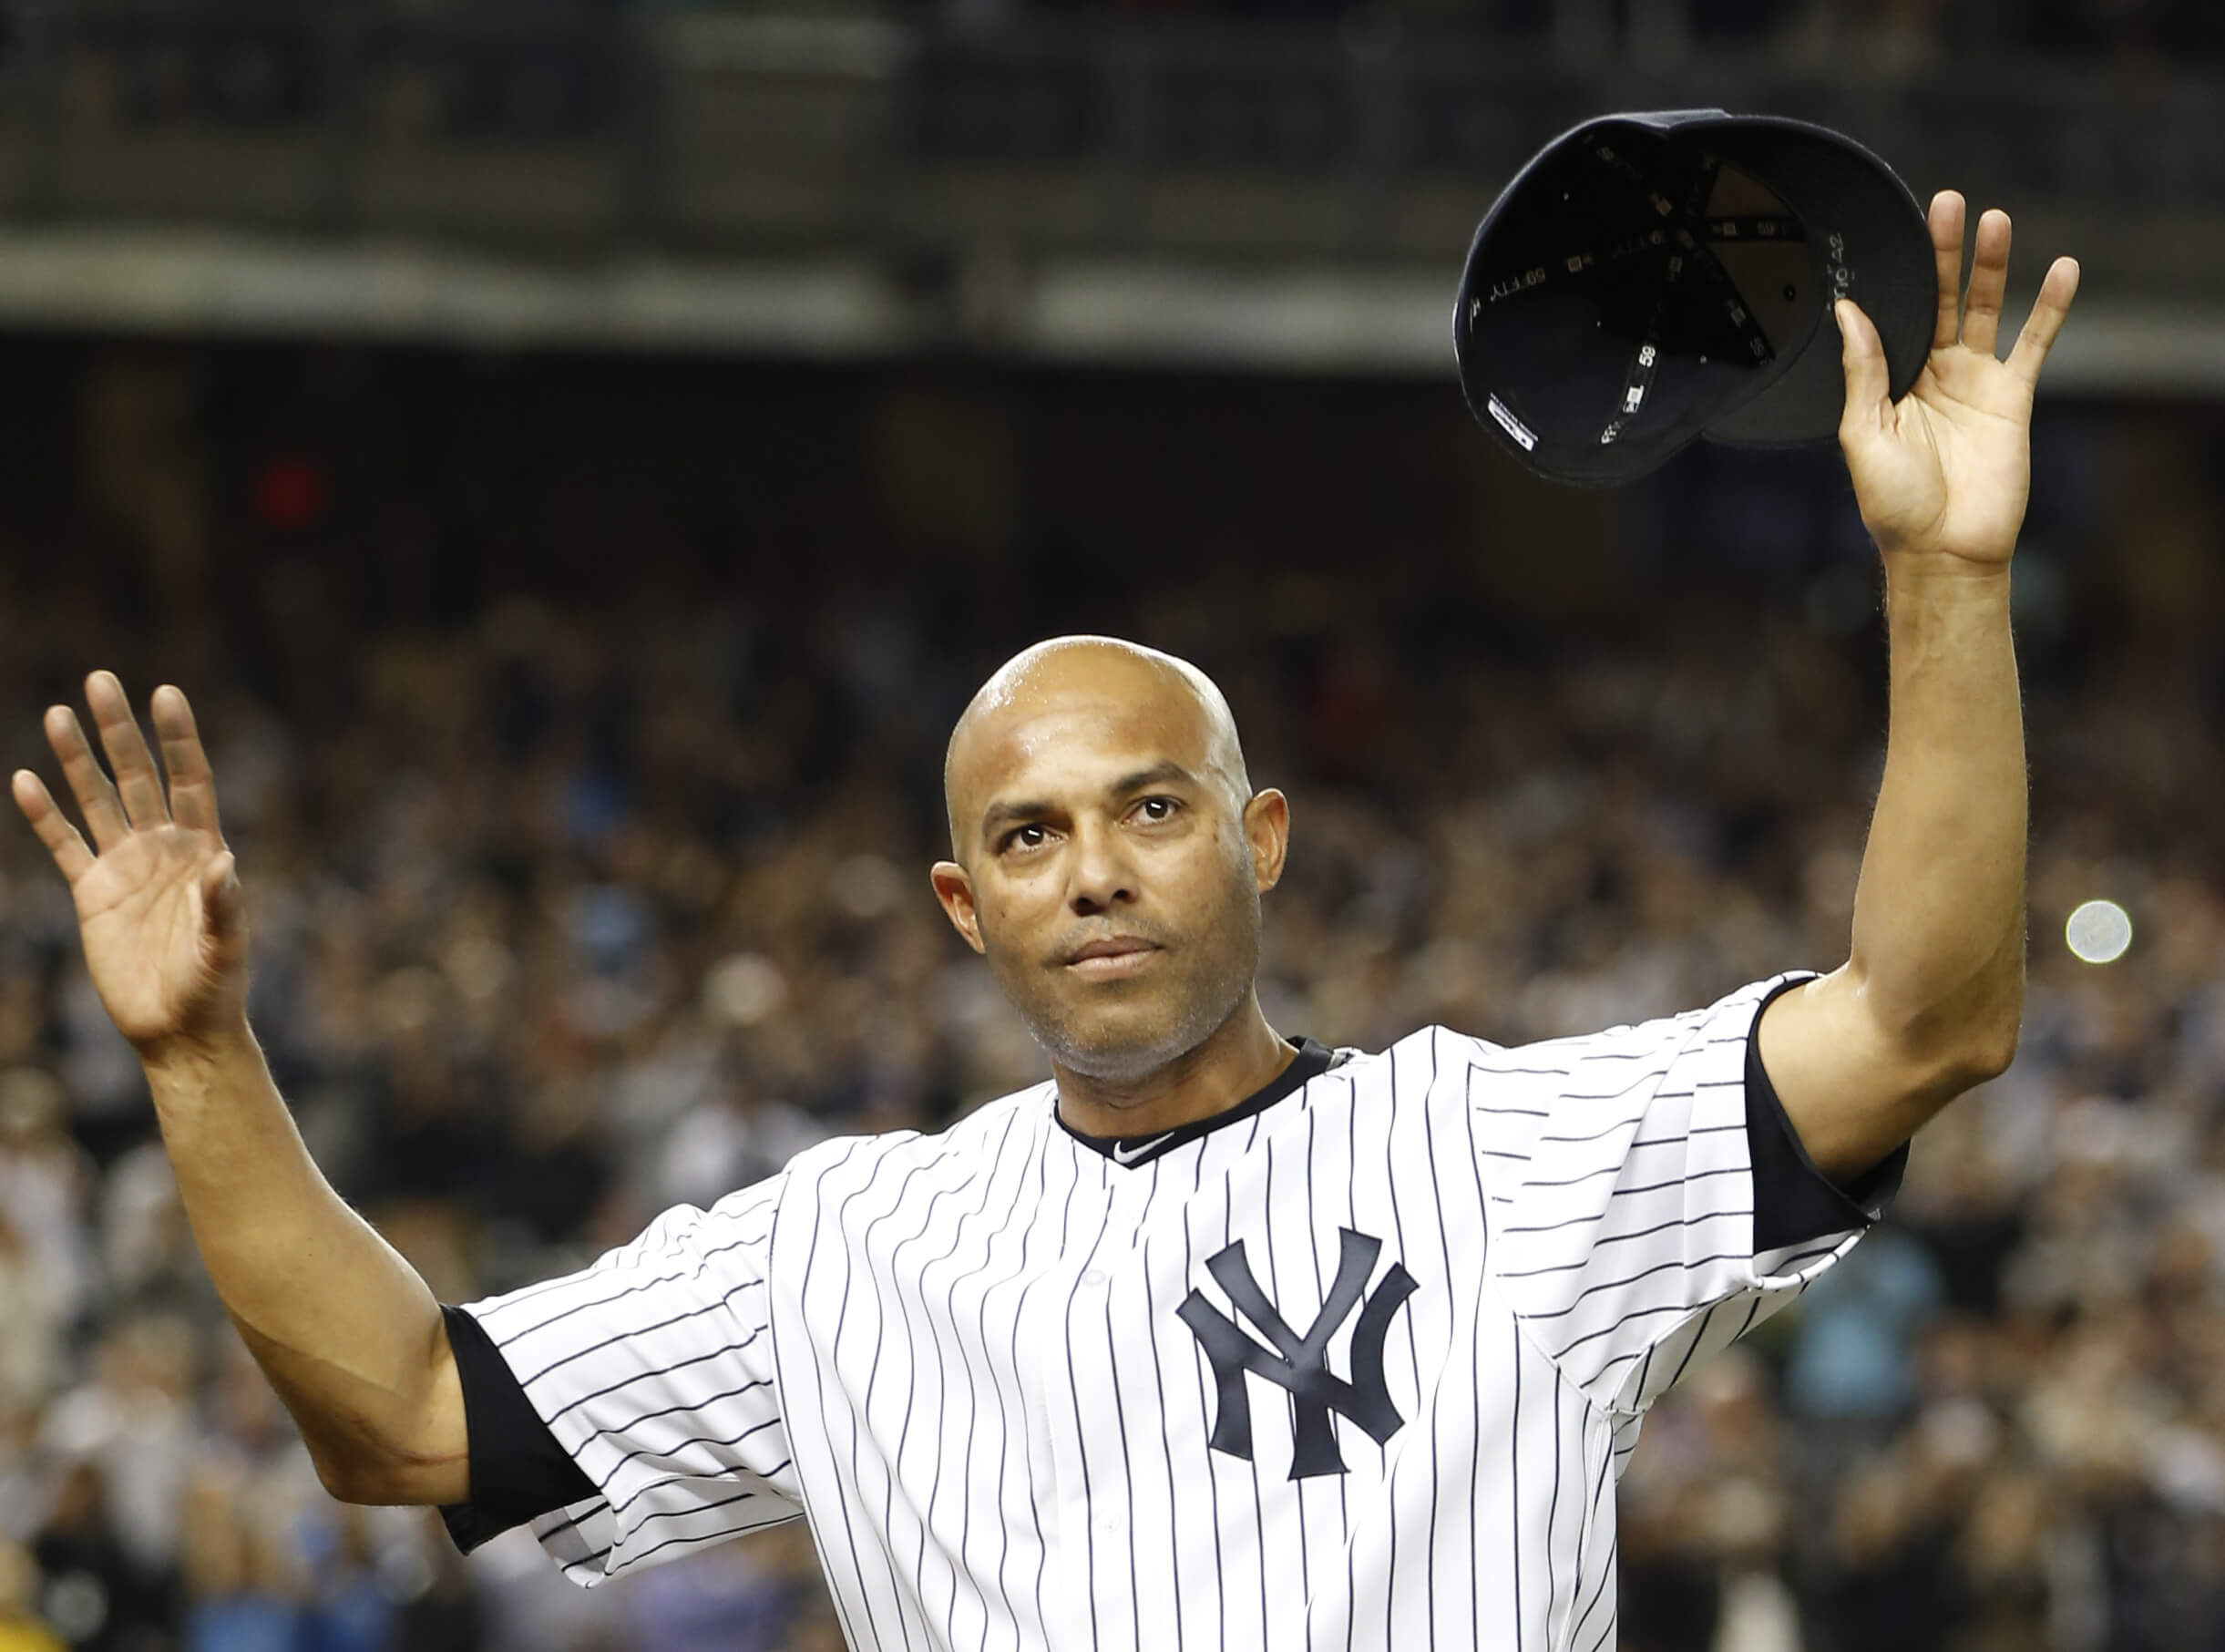 New York Yankees relief pitcher Mariano Rivera acknowledges the crowd's standing ovation Sept. 26, 2013, after coming off the mound in the ninth inning of his final appearance in a baseball game in New York.